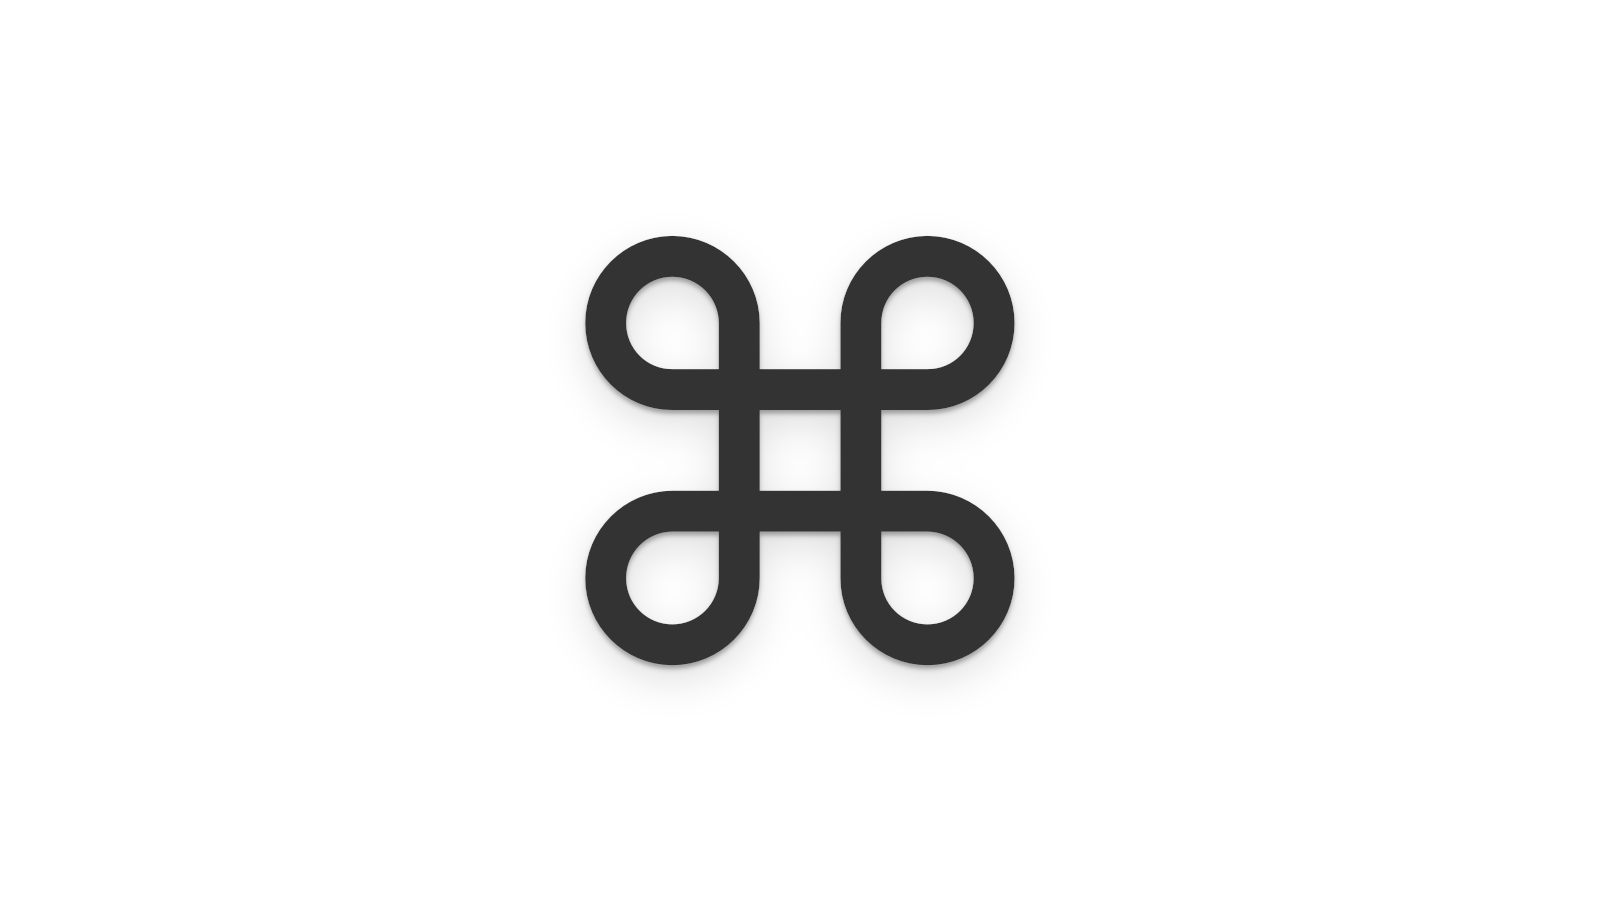 Why the Looped Square (⌘) Symbol? image